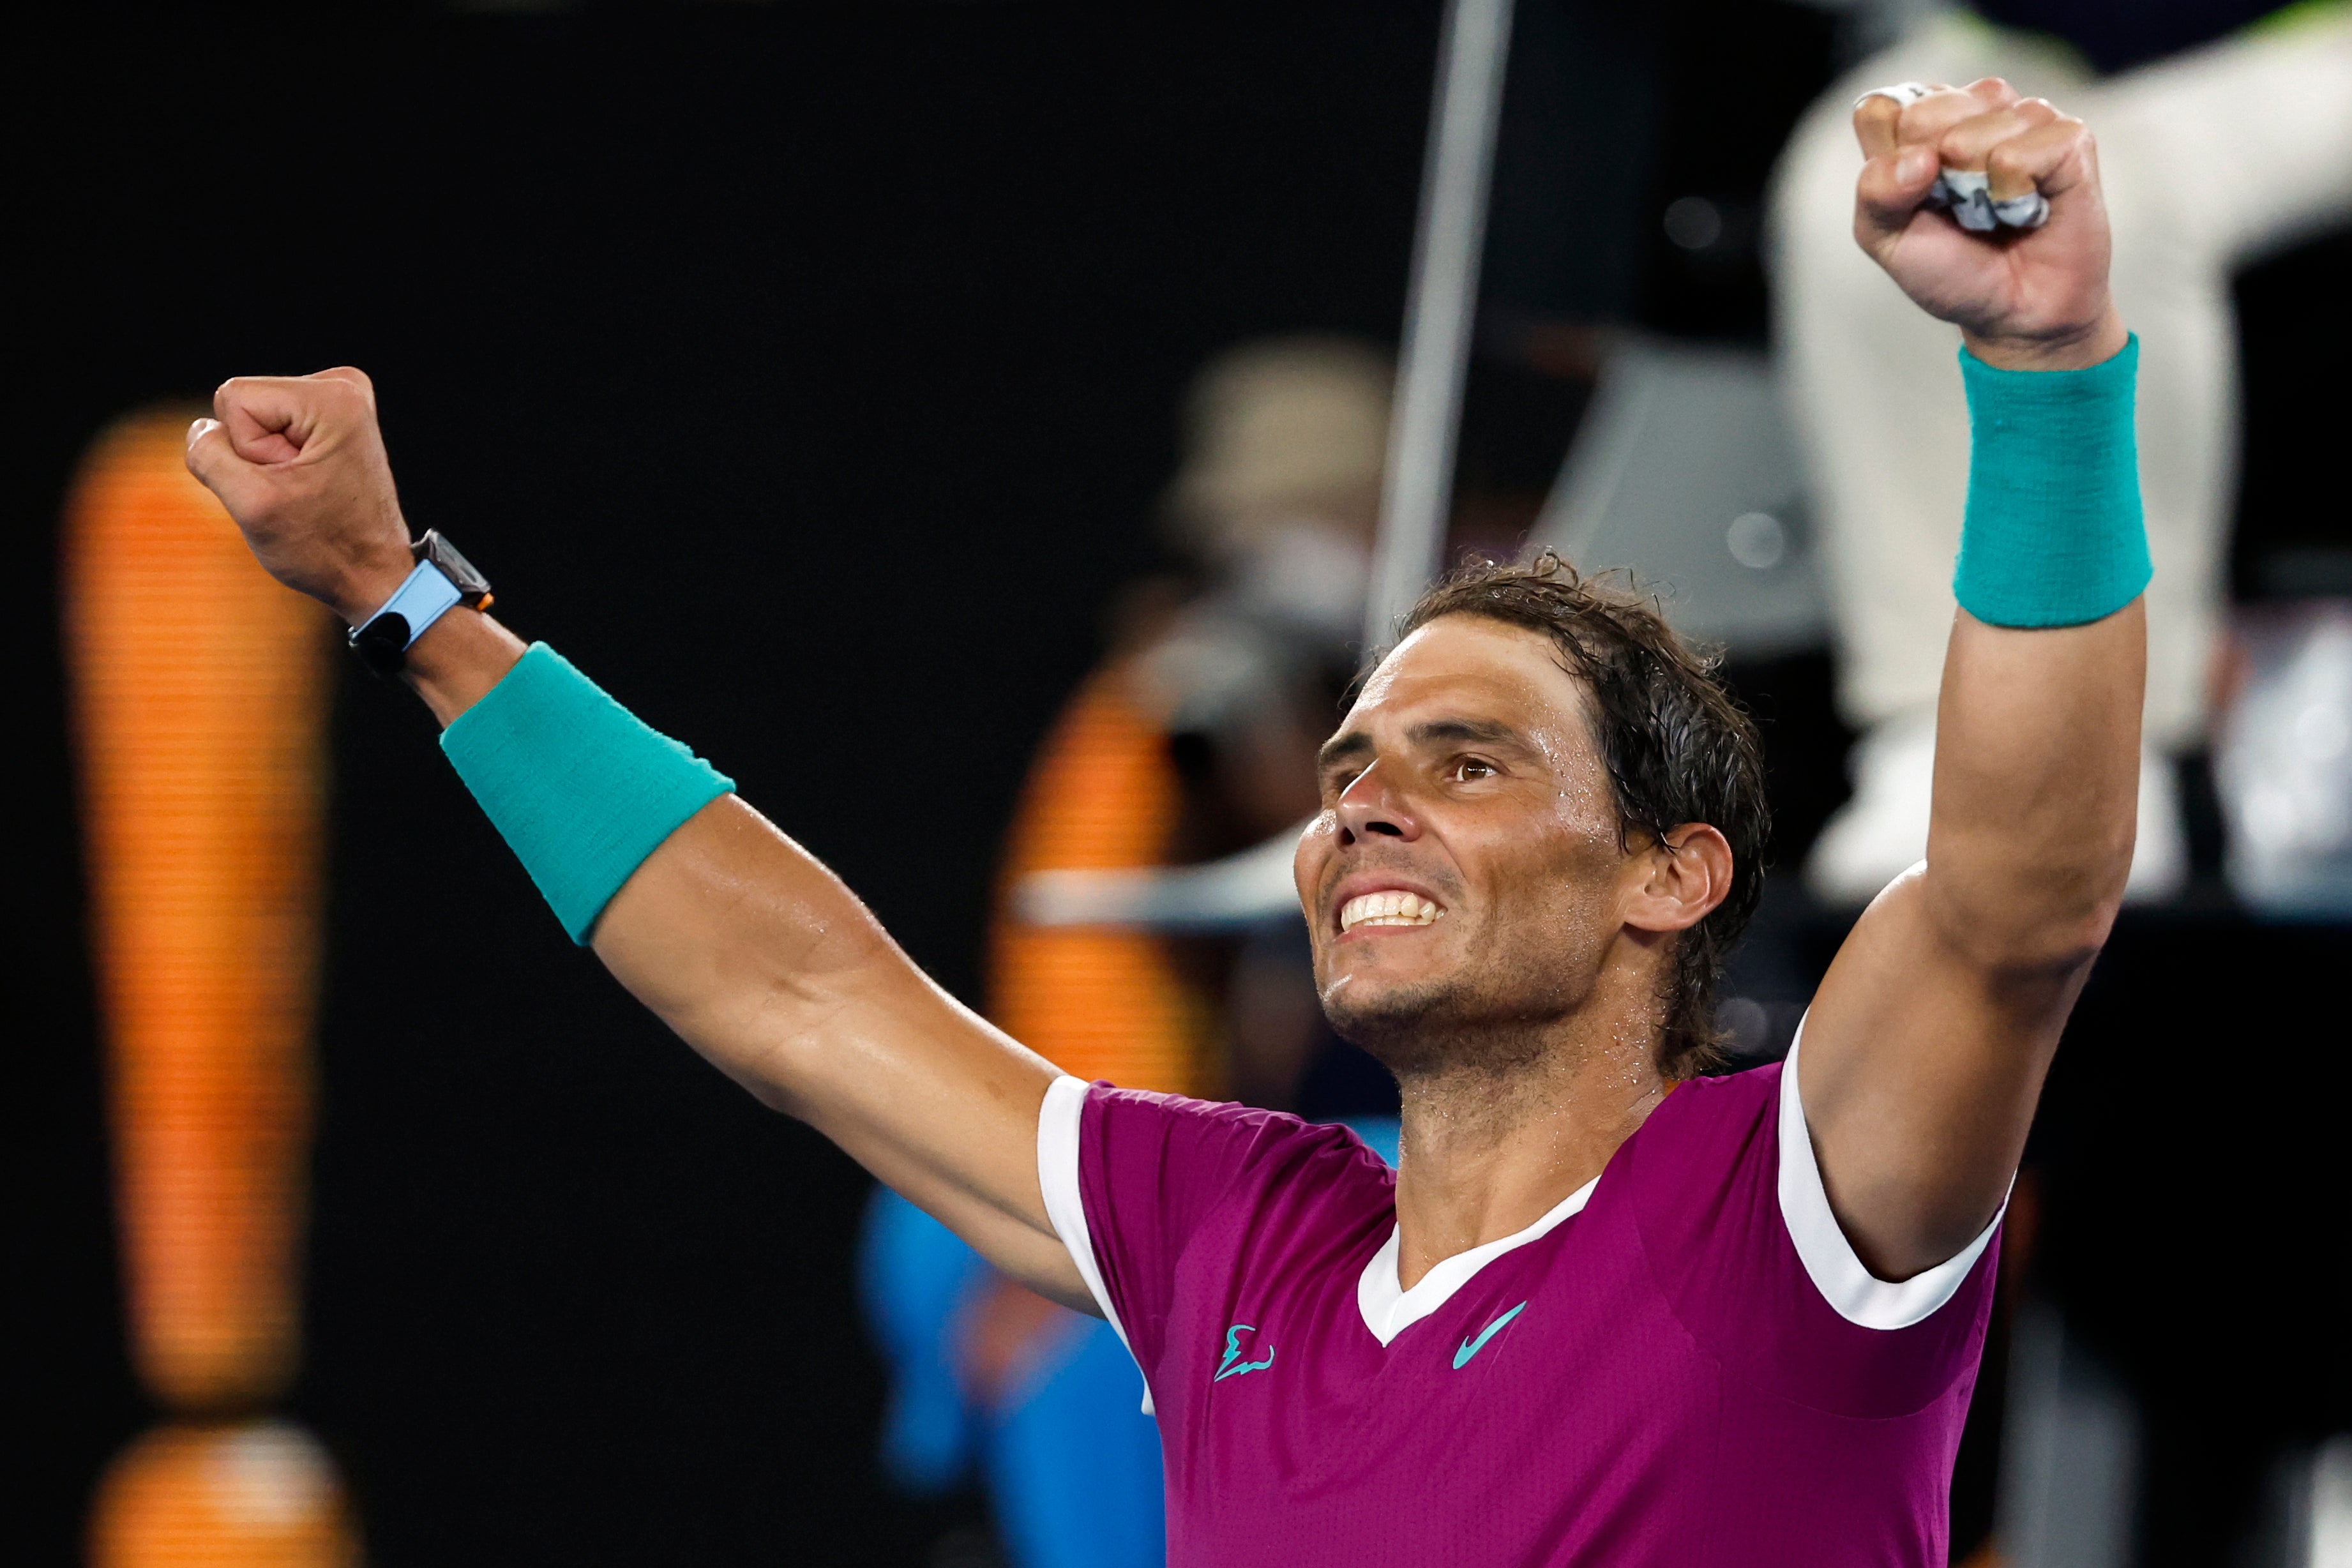 Nadal triumphed in four sets